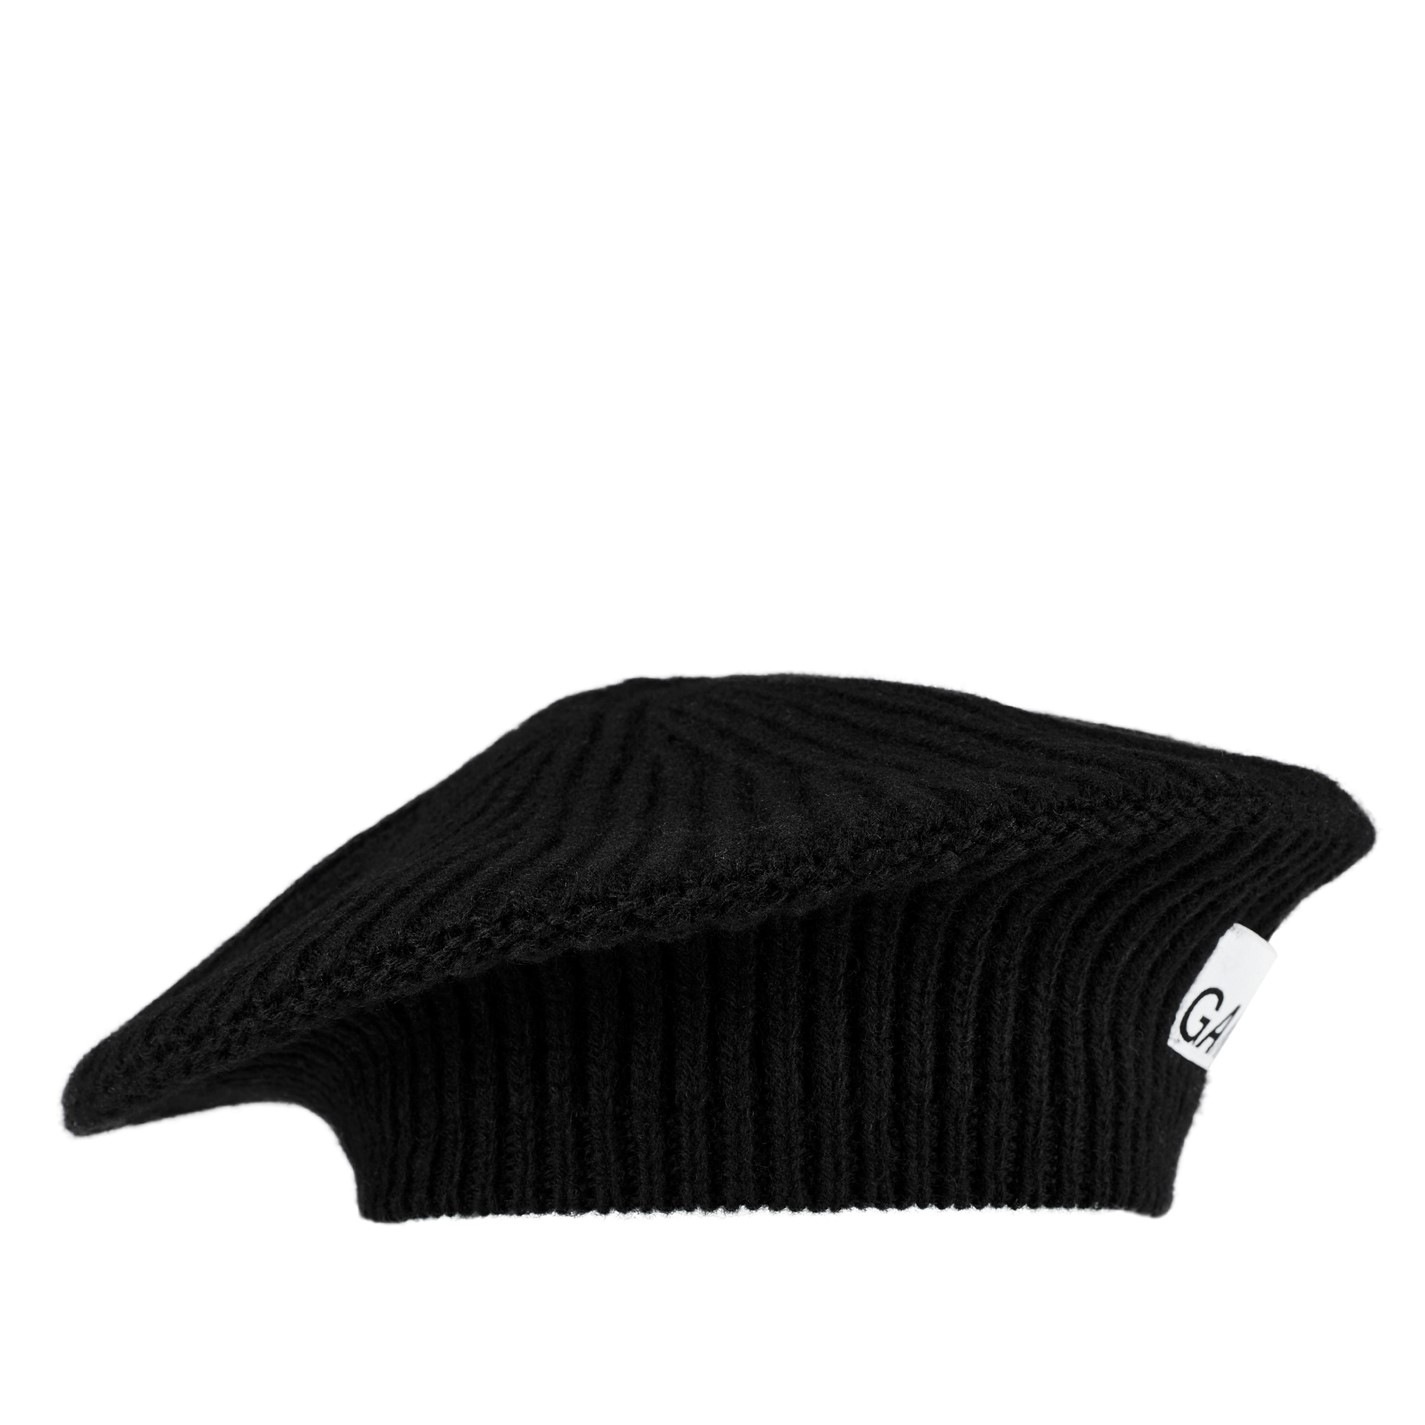 STRUCTURED RIBBED BERET - 2